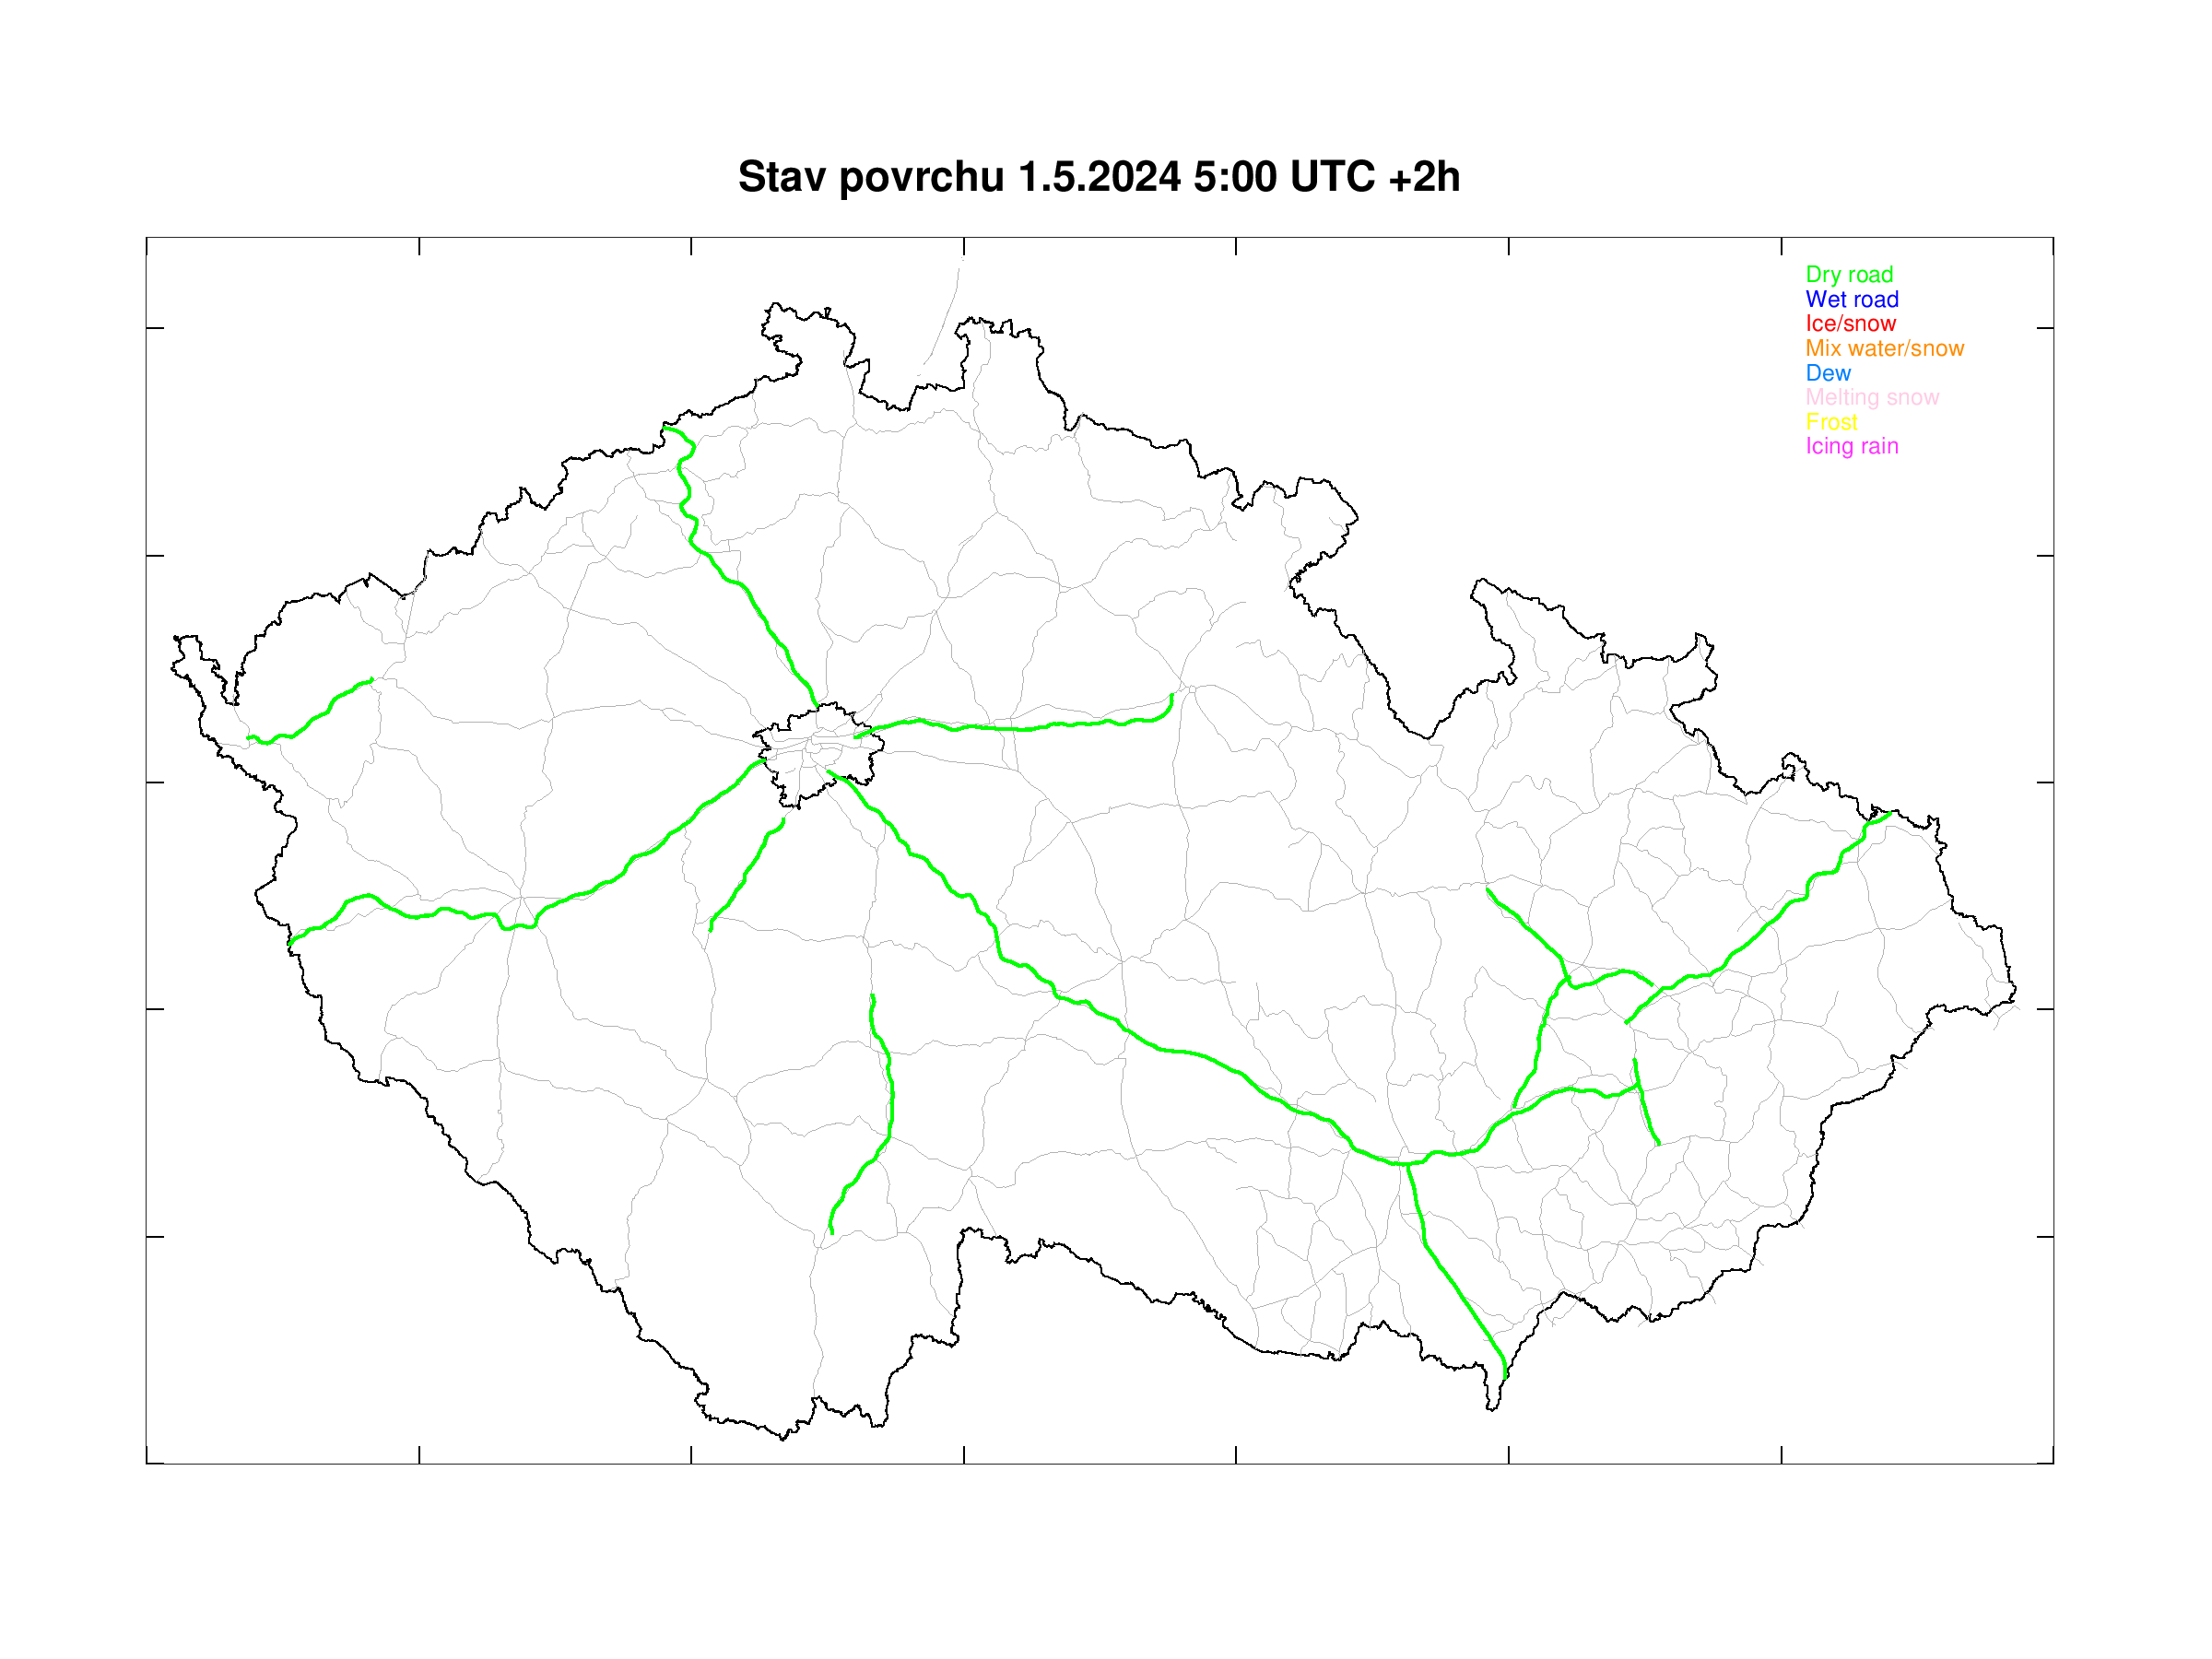 Road surface condition forecast for Czech highways +2h